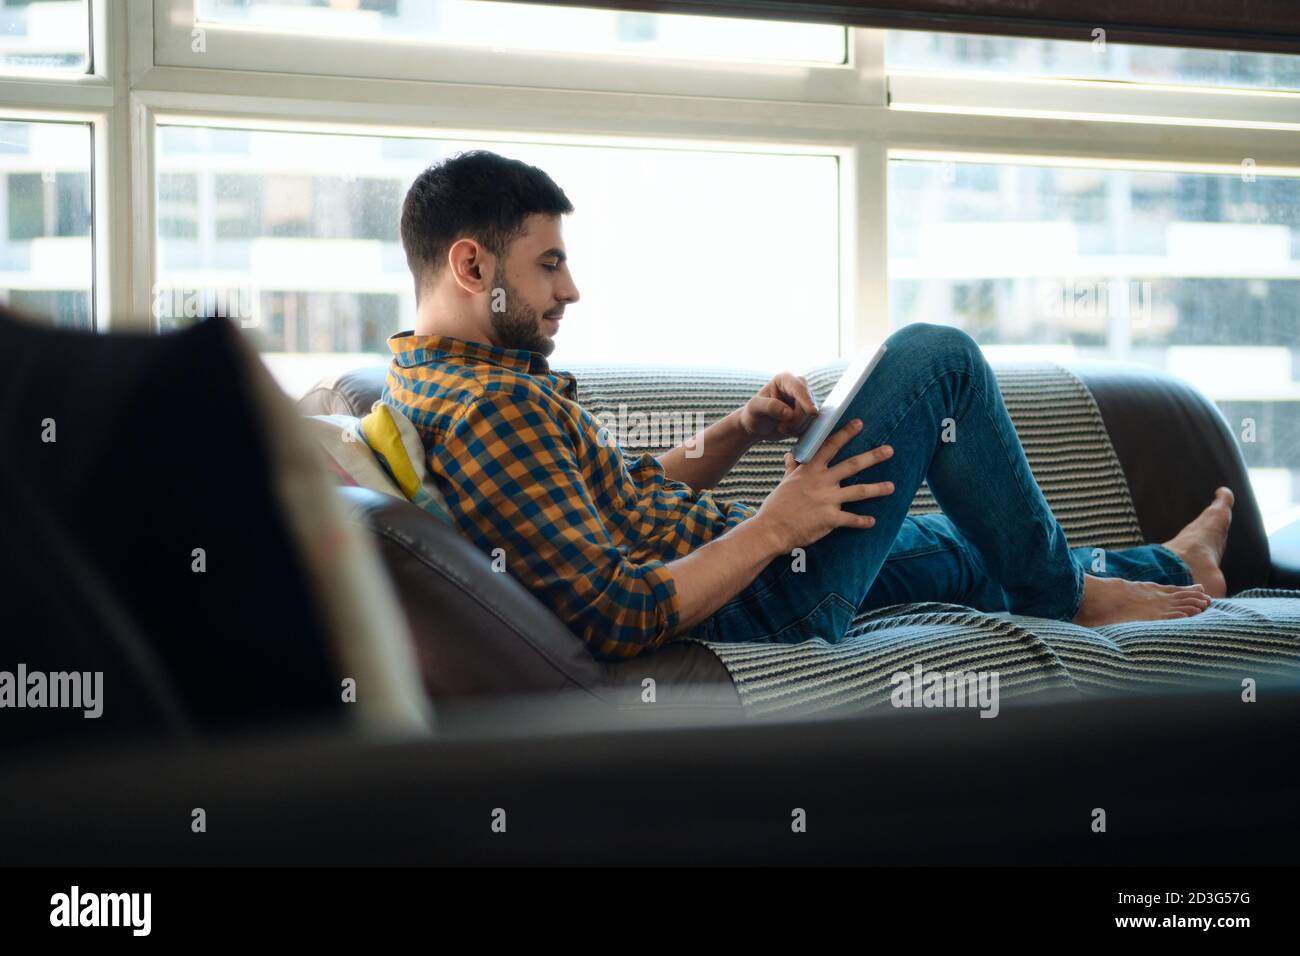 Man Choosing Movie For Streaming On Tablet Computer Stock Photo